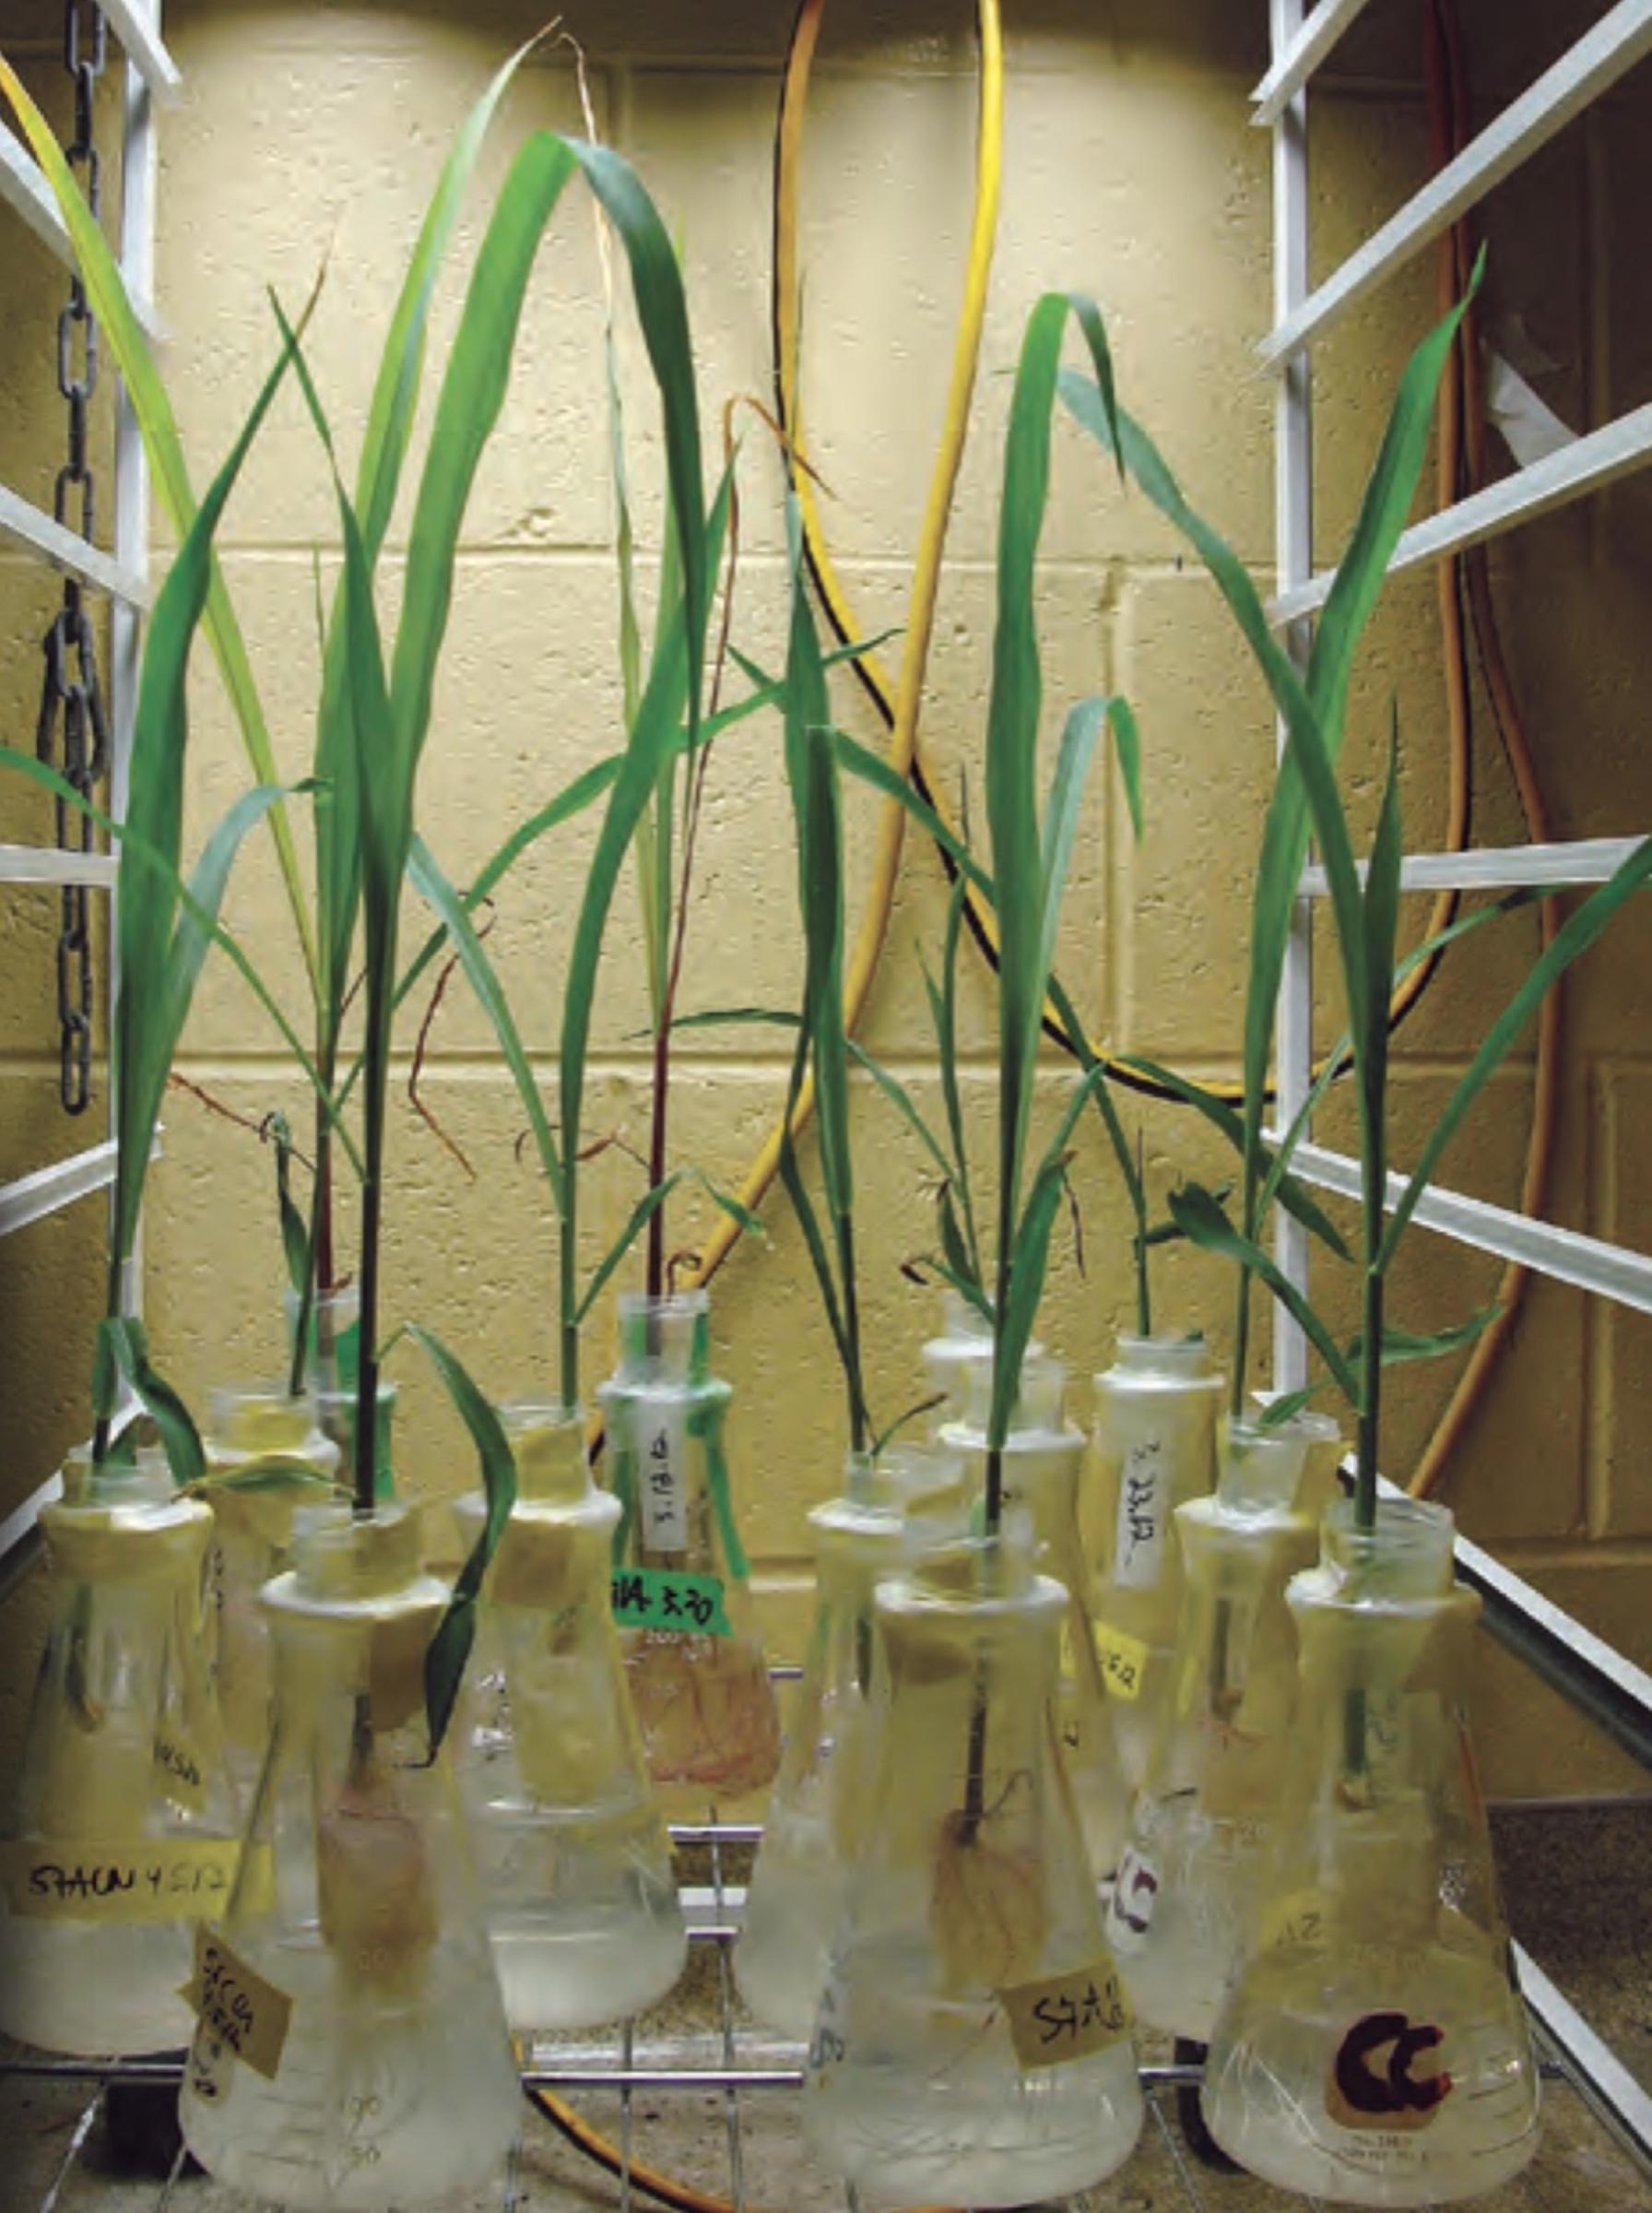 Prion uptake in plants is being studied at the USGS National Wildlife Health Center. Photo courtesy USGS/Christina Carlson